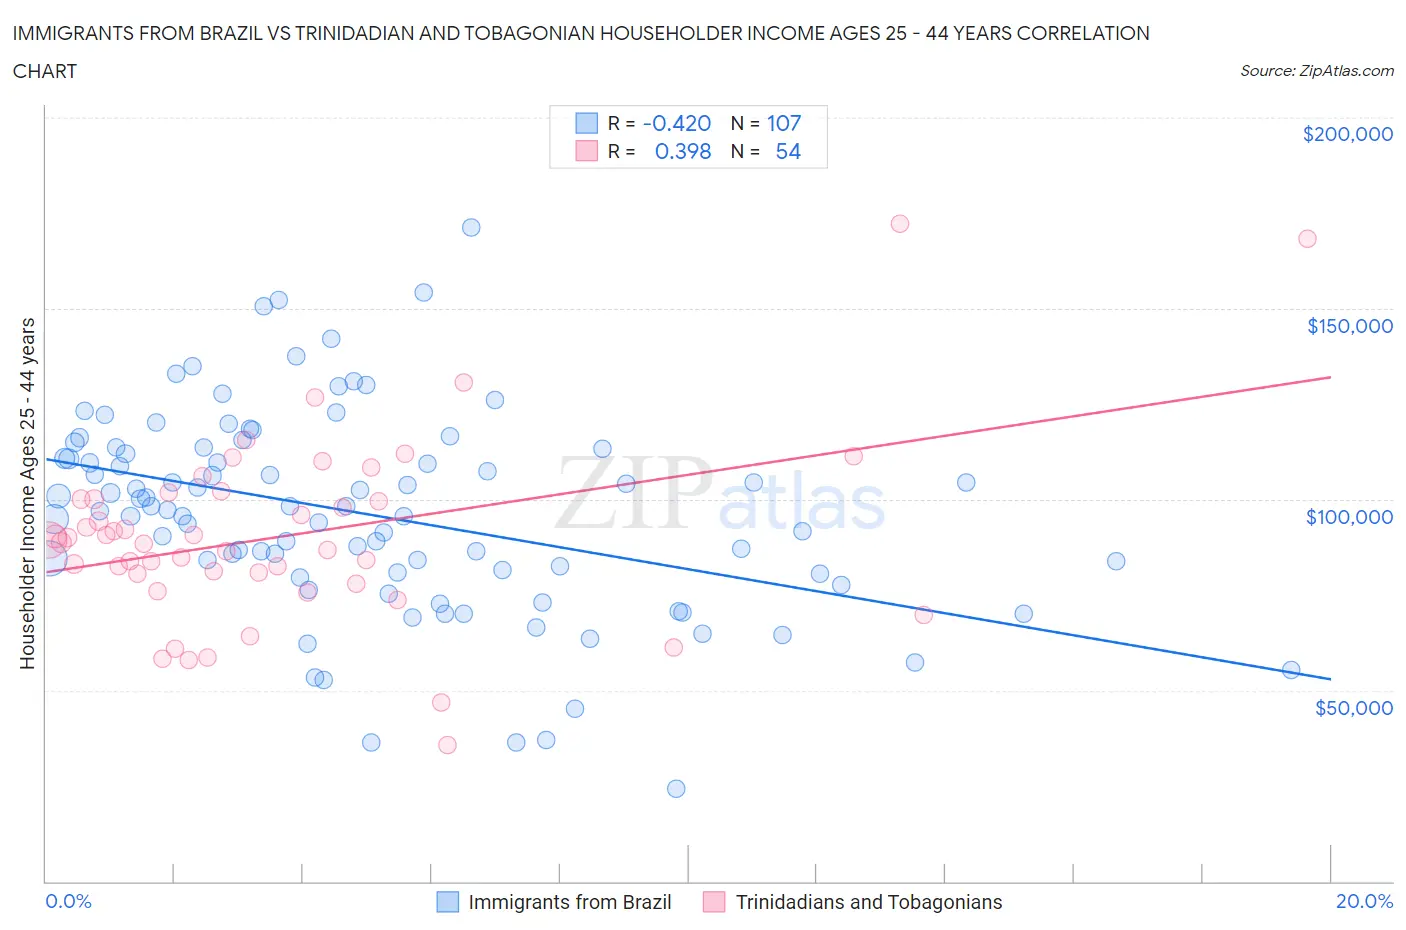 Immigrants from Brazil vs Trinidadian and Tobagonian Householder Income Ages 25 - 44 years